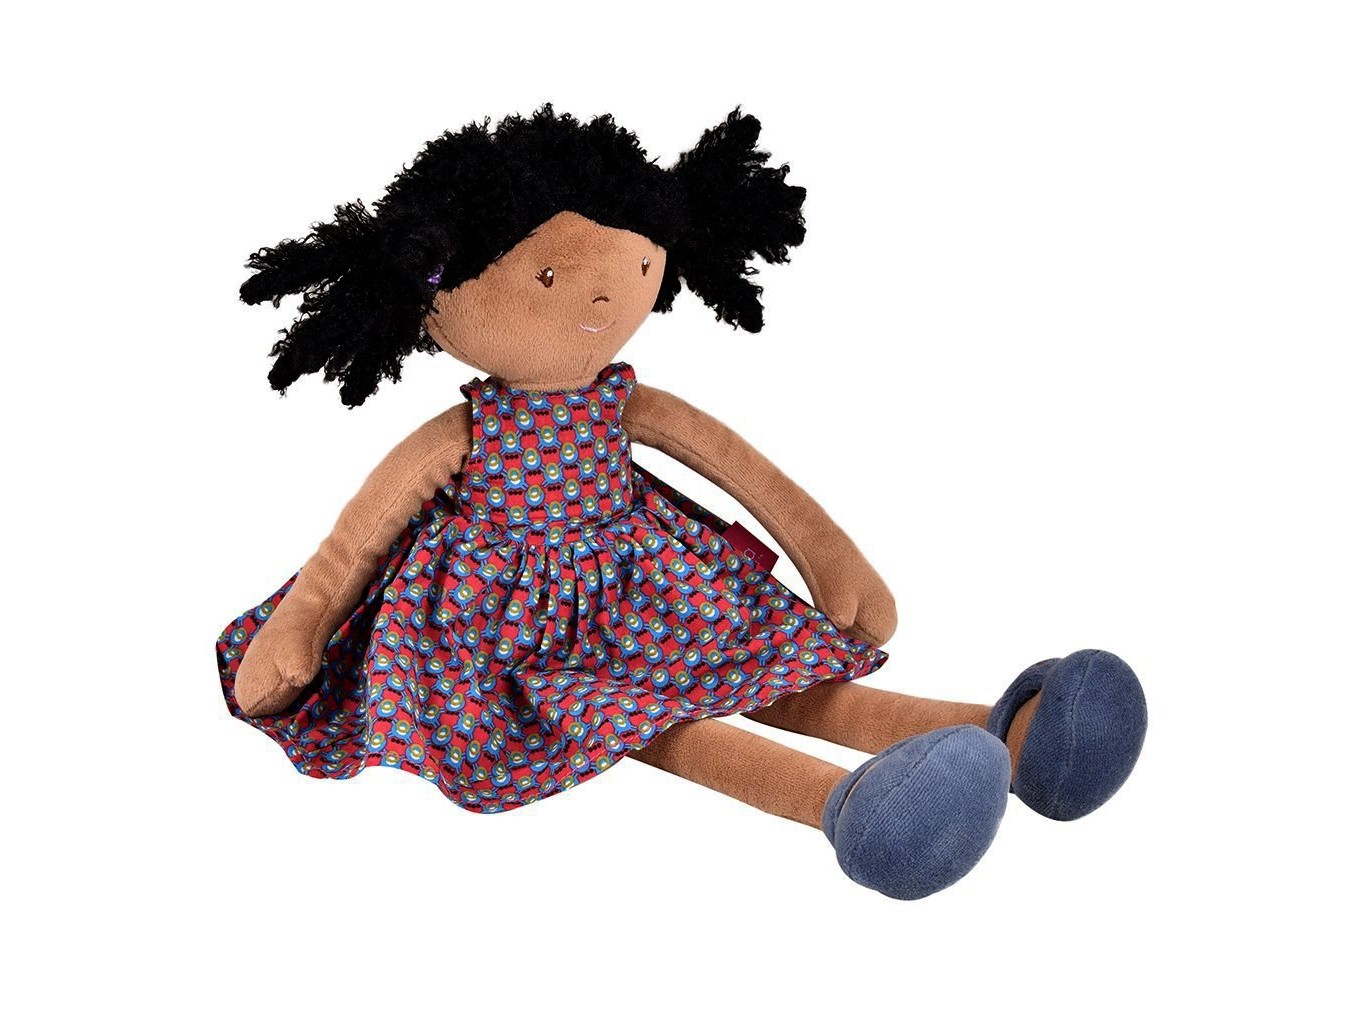 Leota - Black Hair Doll with Patterned Dress